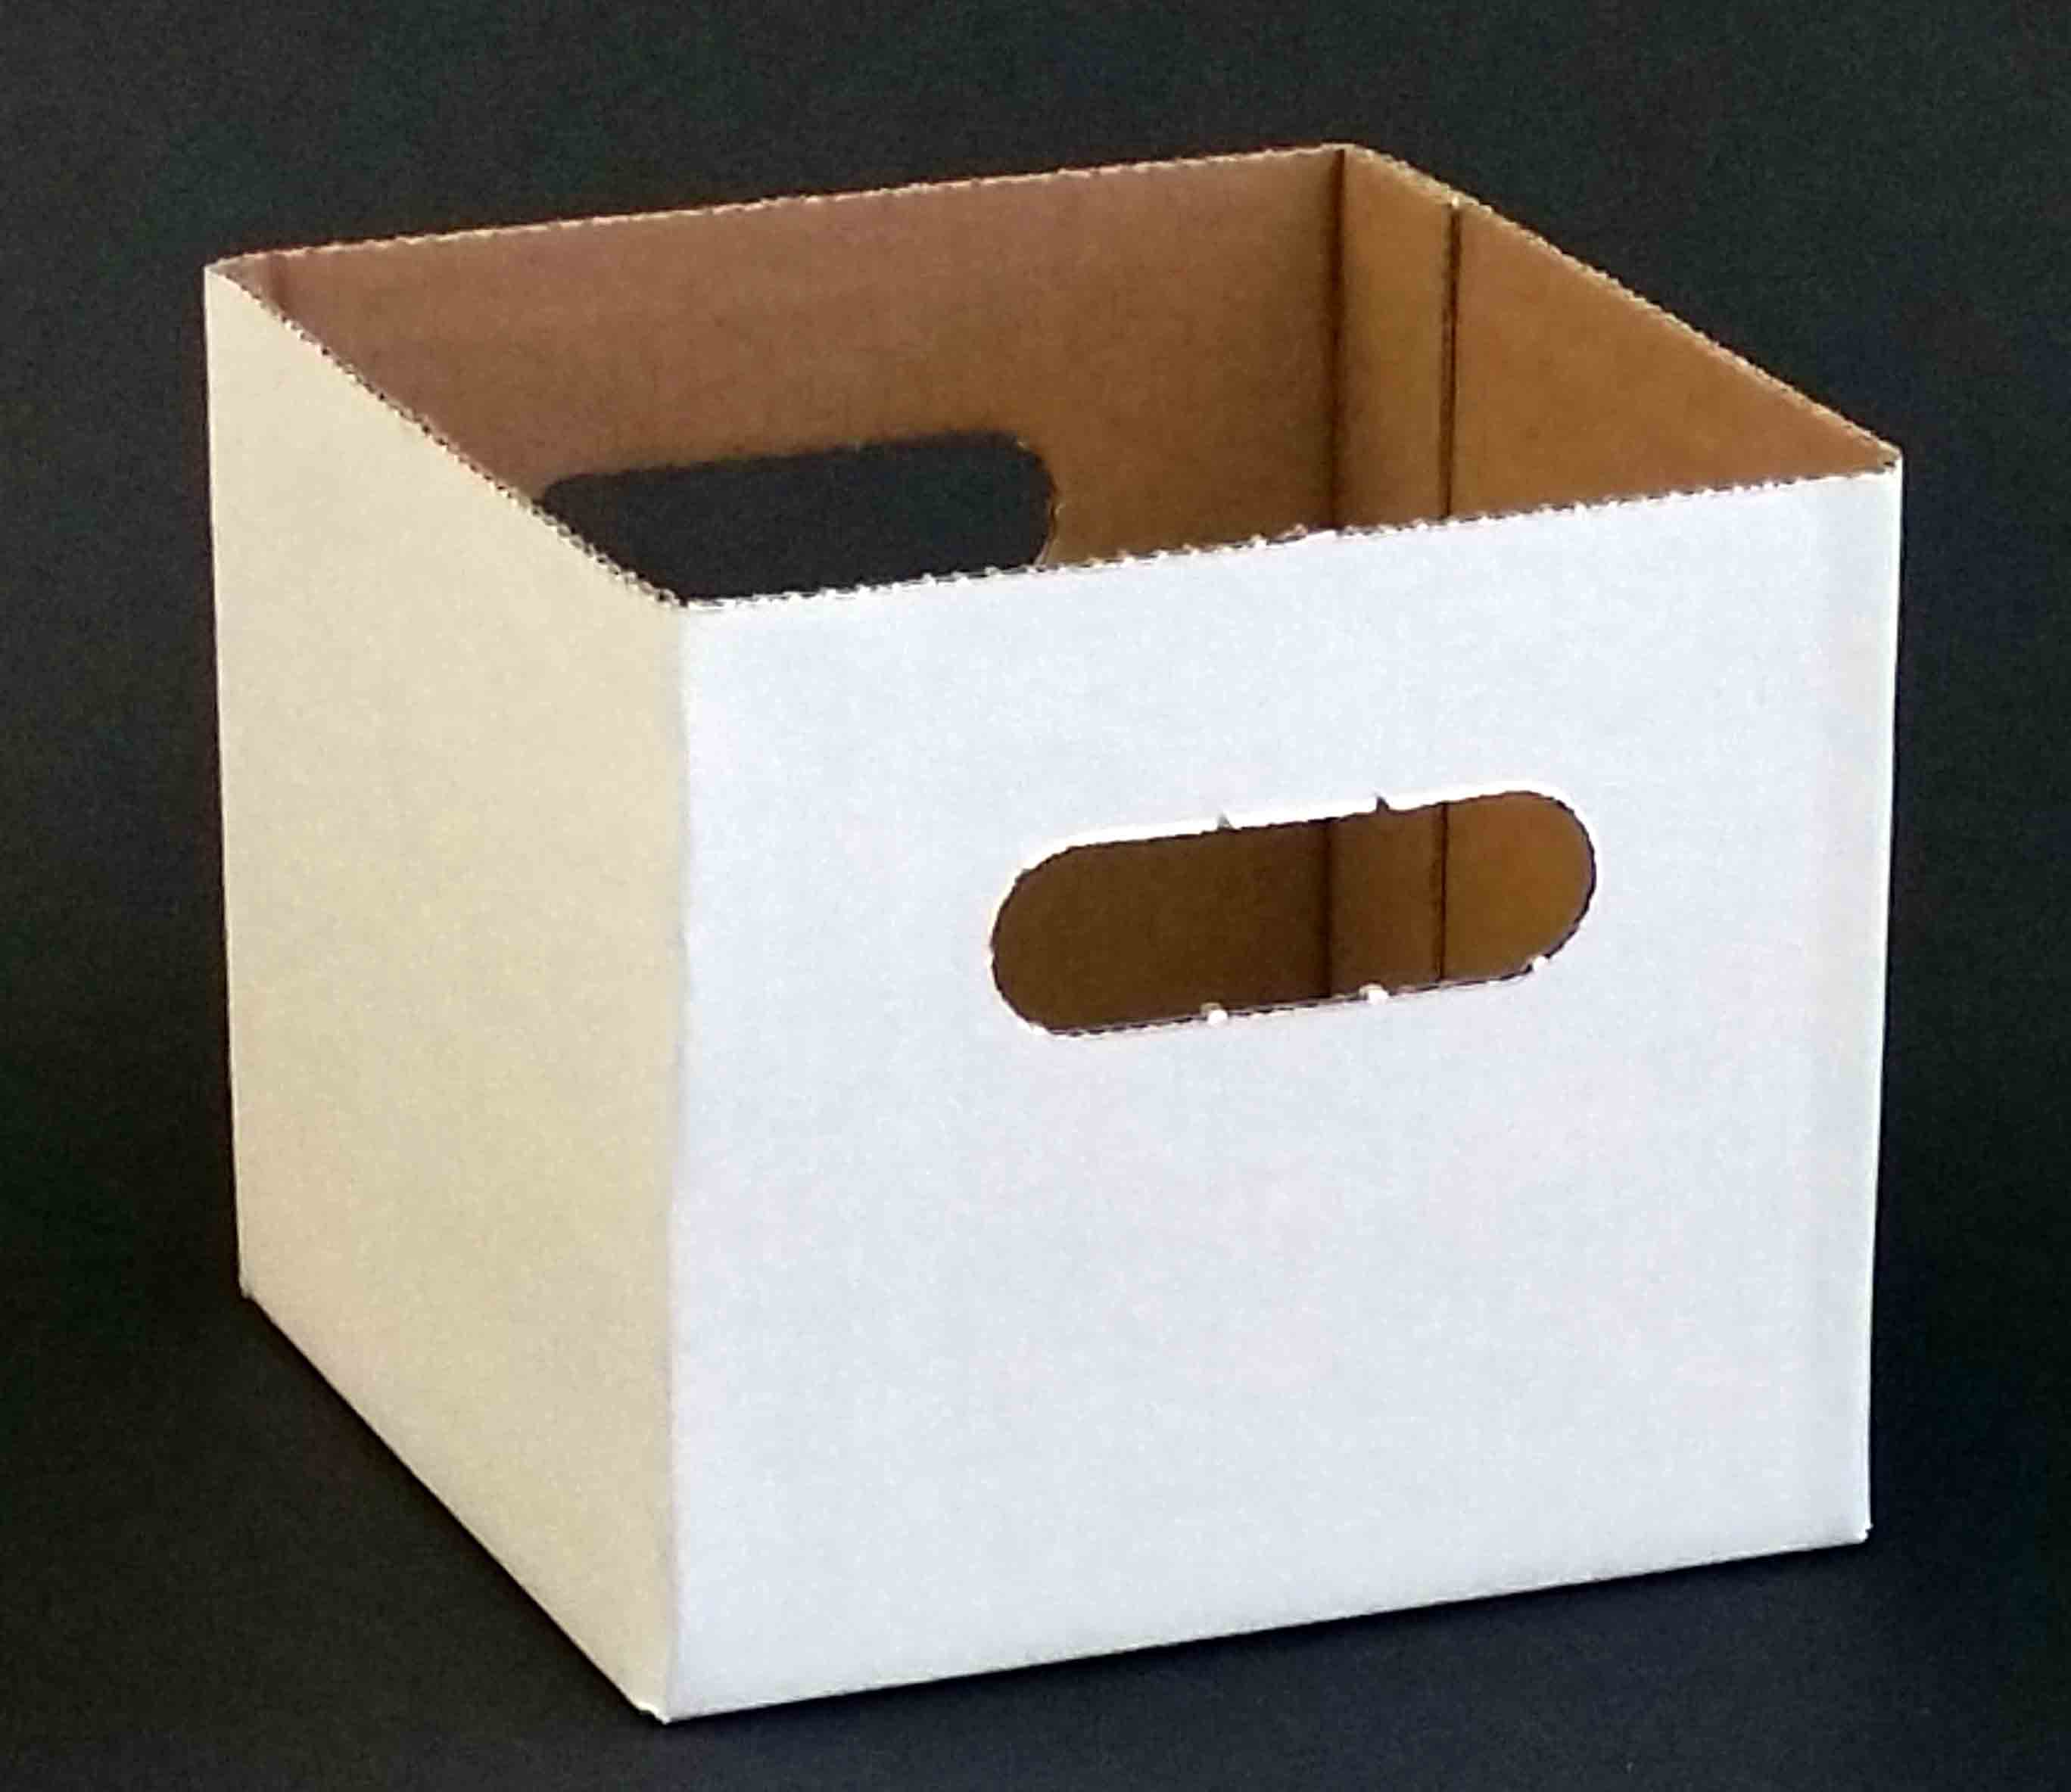 776 - 7 x 7 x 6" Delivery Box - 41.35 bdle